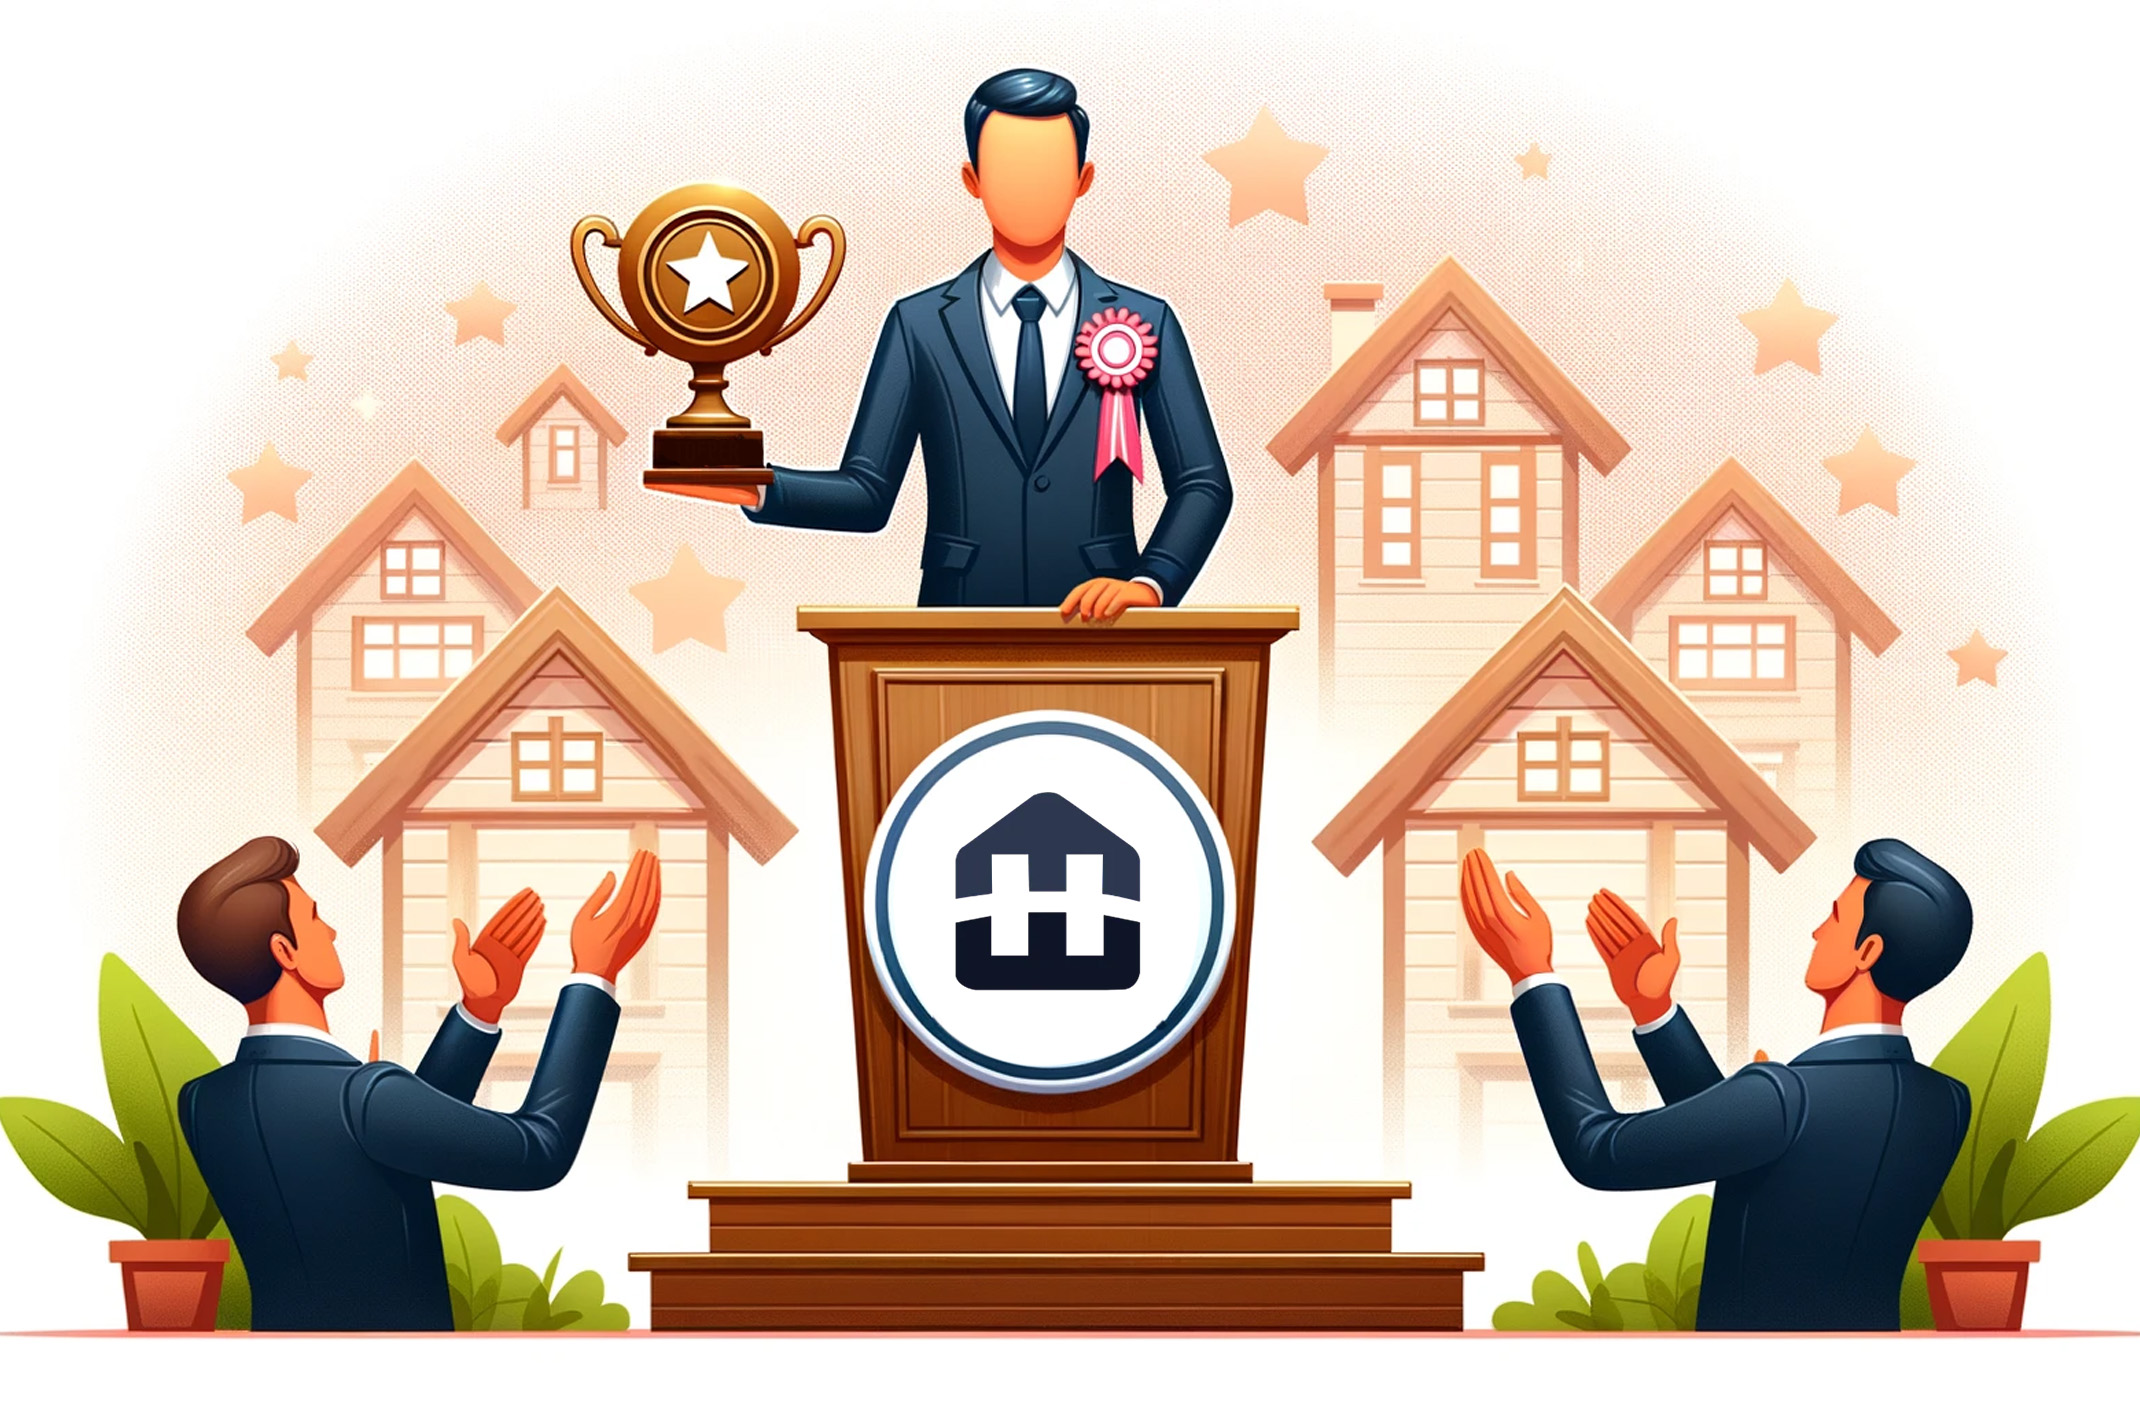 Why Join Houstir and Become a 100% Commission Broker